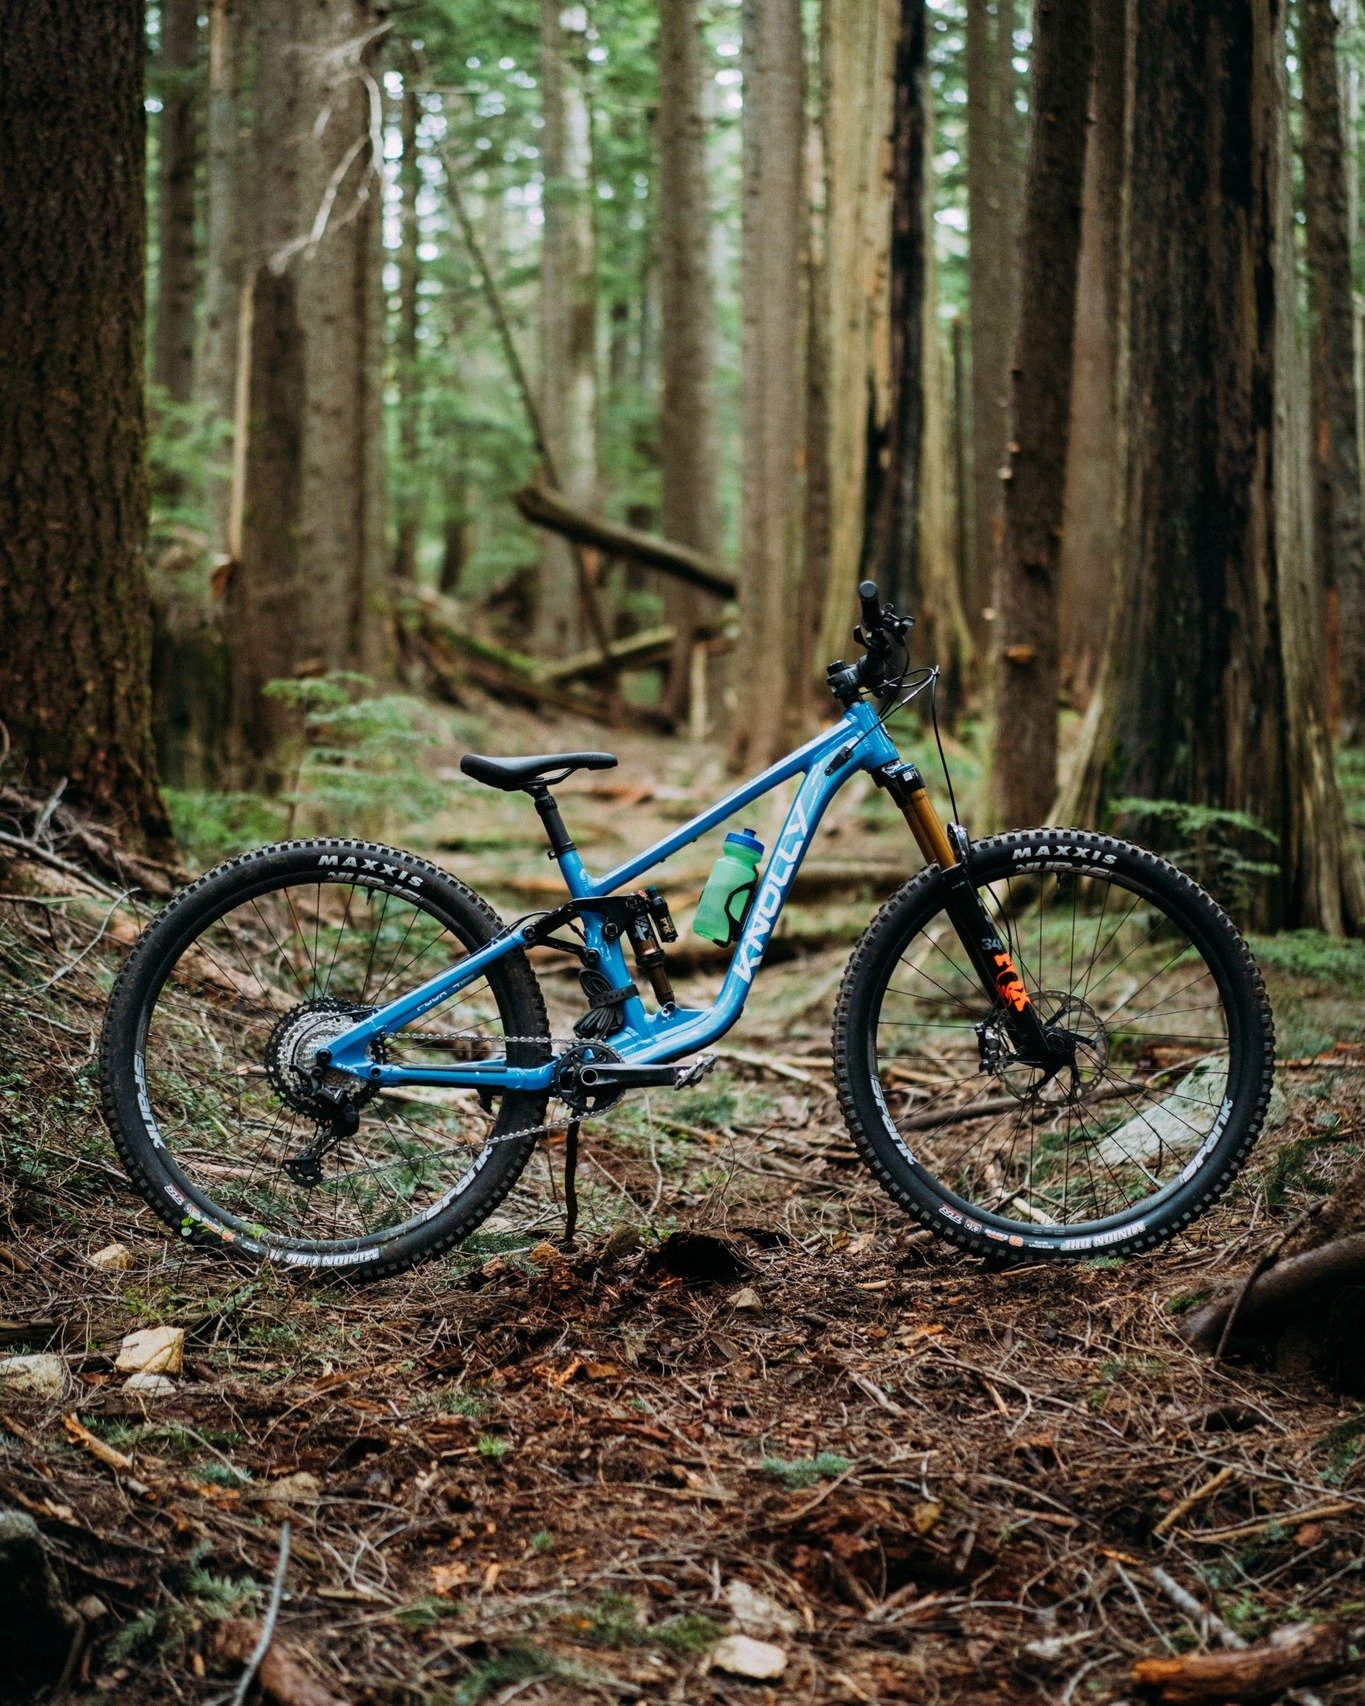 Knolly's new Fugitive is here 😍
More than a trail bike, not quite an enduro bike. The Fugitive is one of Knolly's most popular bikes - and for good reason. There isn't much it can't do.
Full blog post and demo bikes coming soon...
.
Psst - get to ou